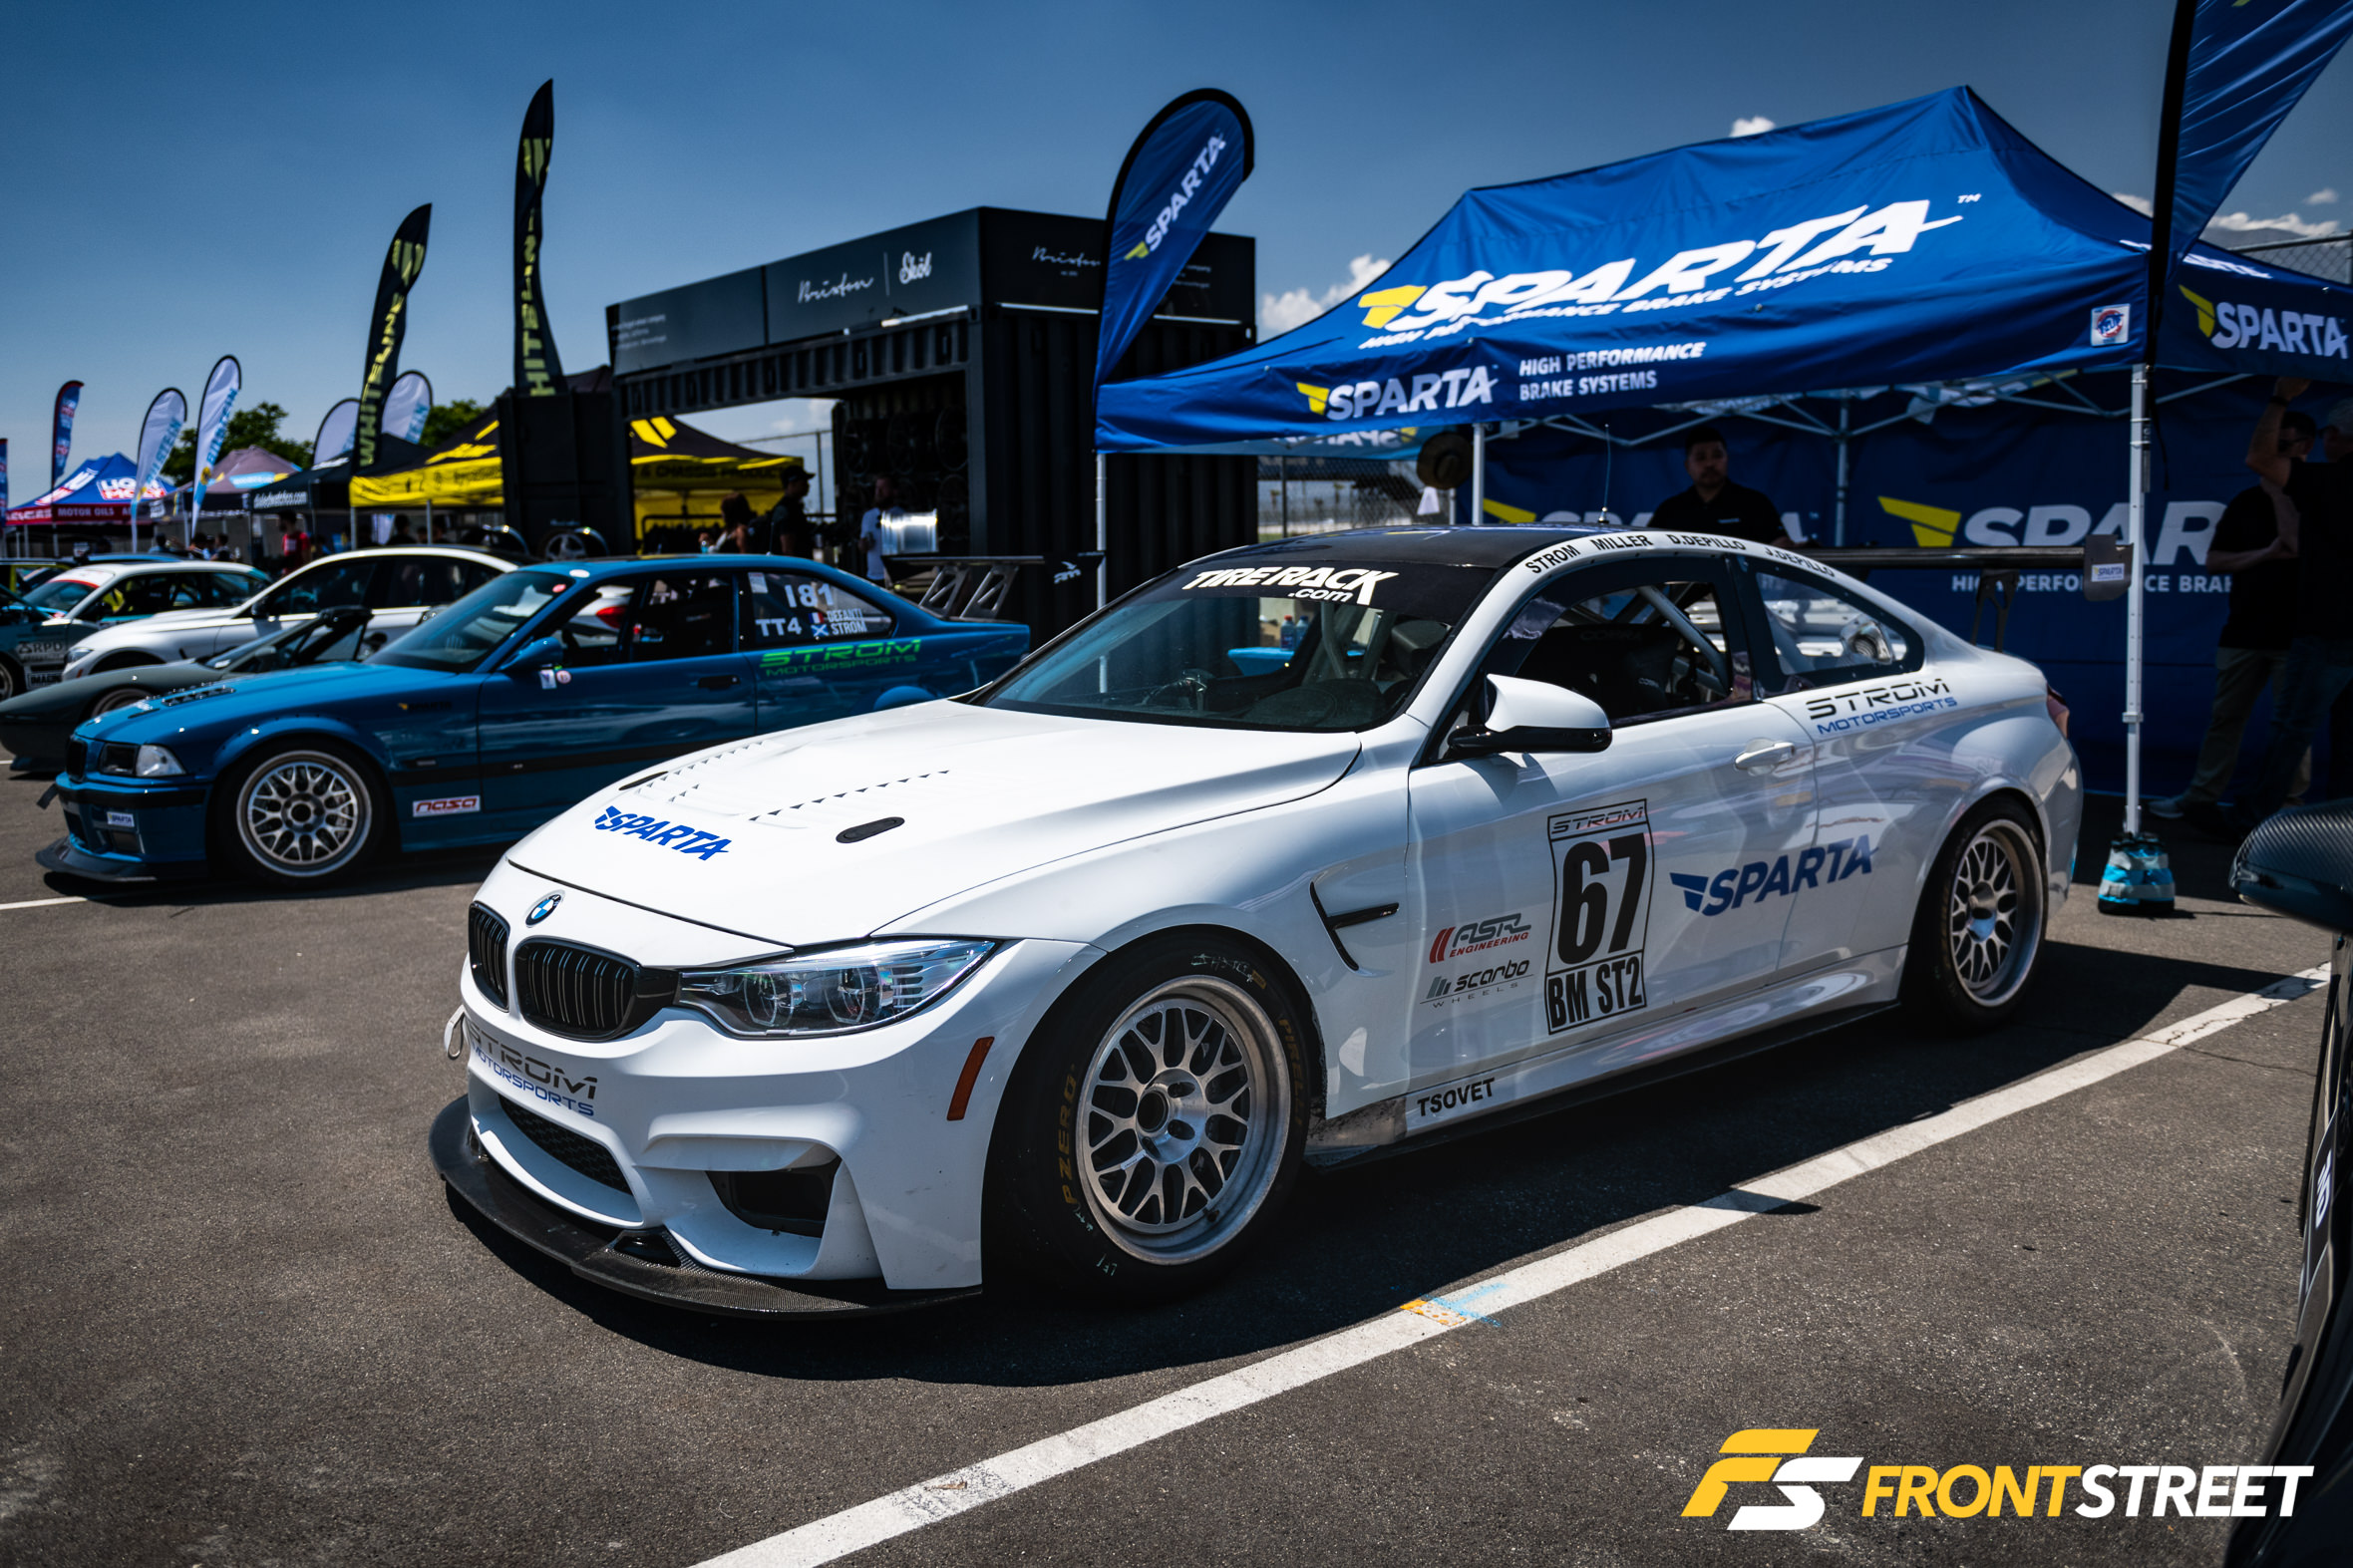 Bimmerfest 20’s Top 20—Two Decades of Dominance!